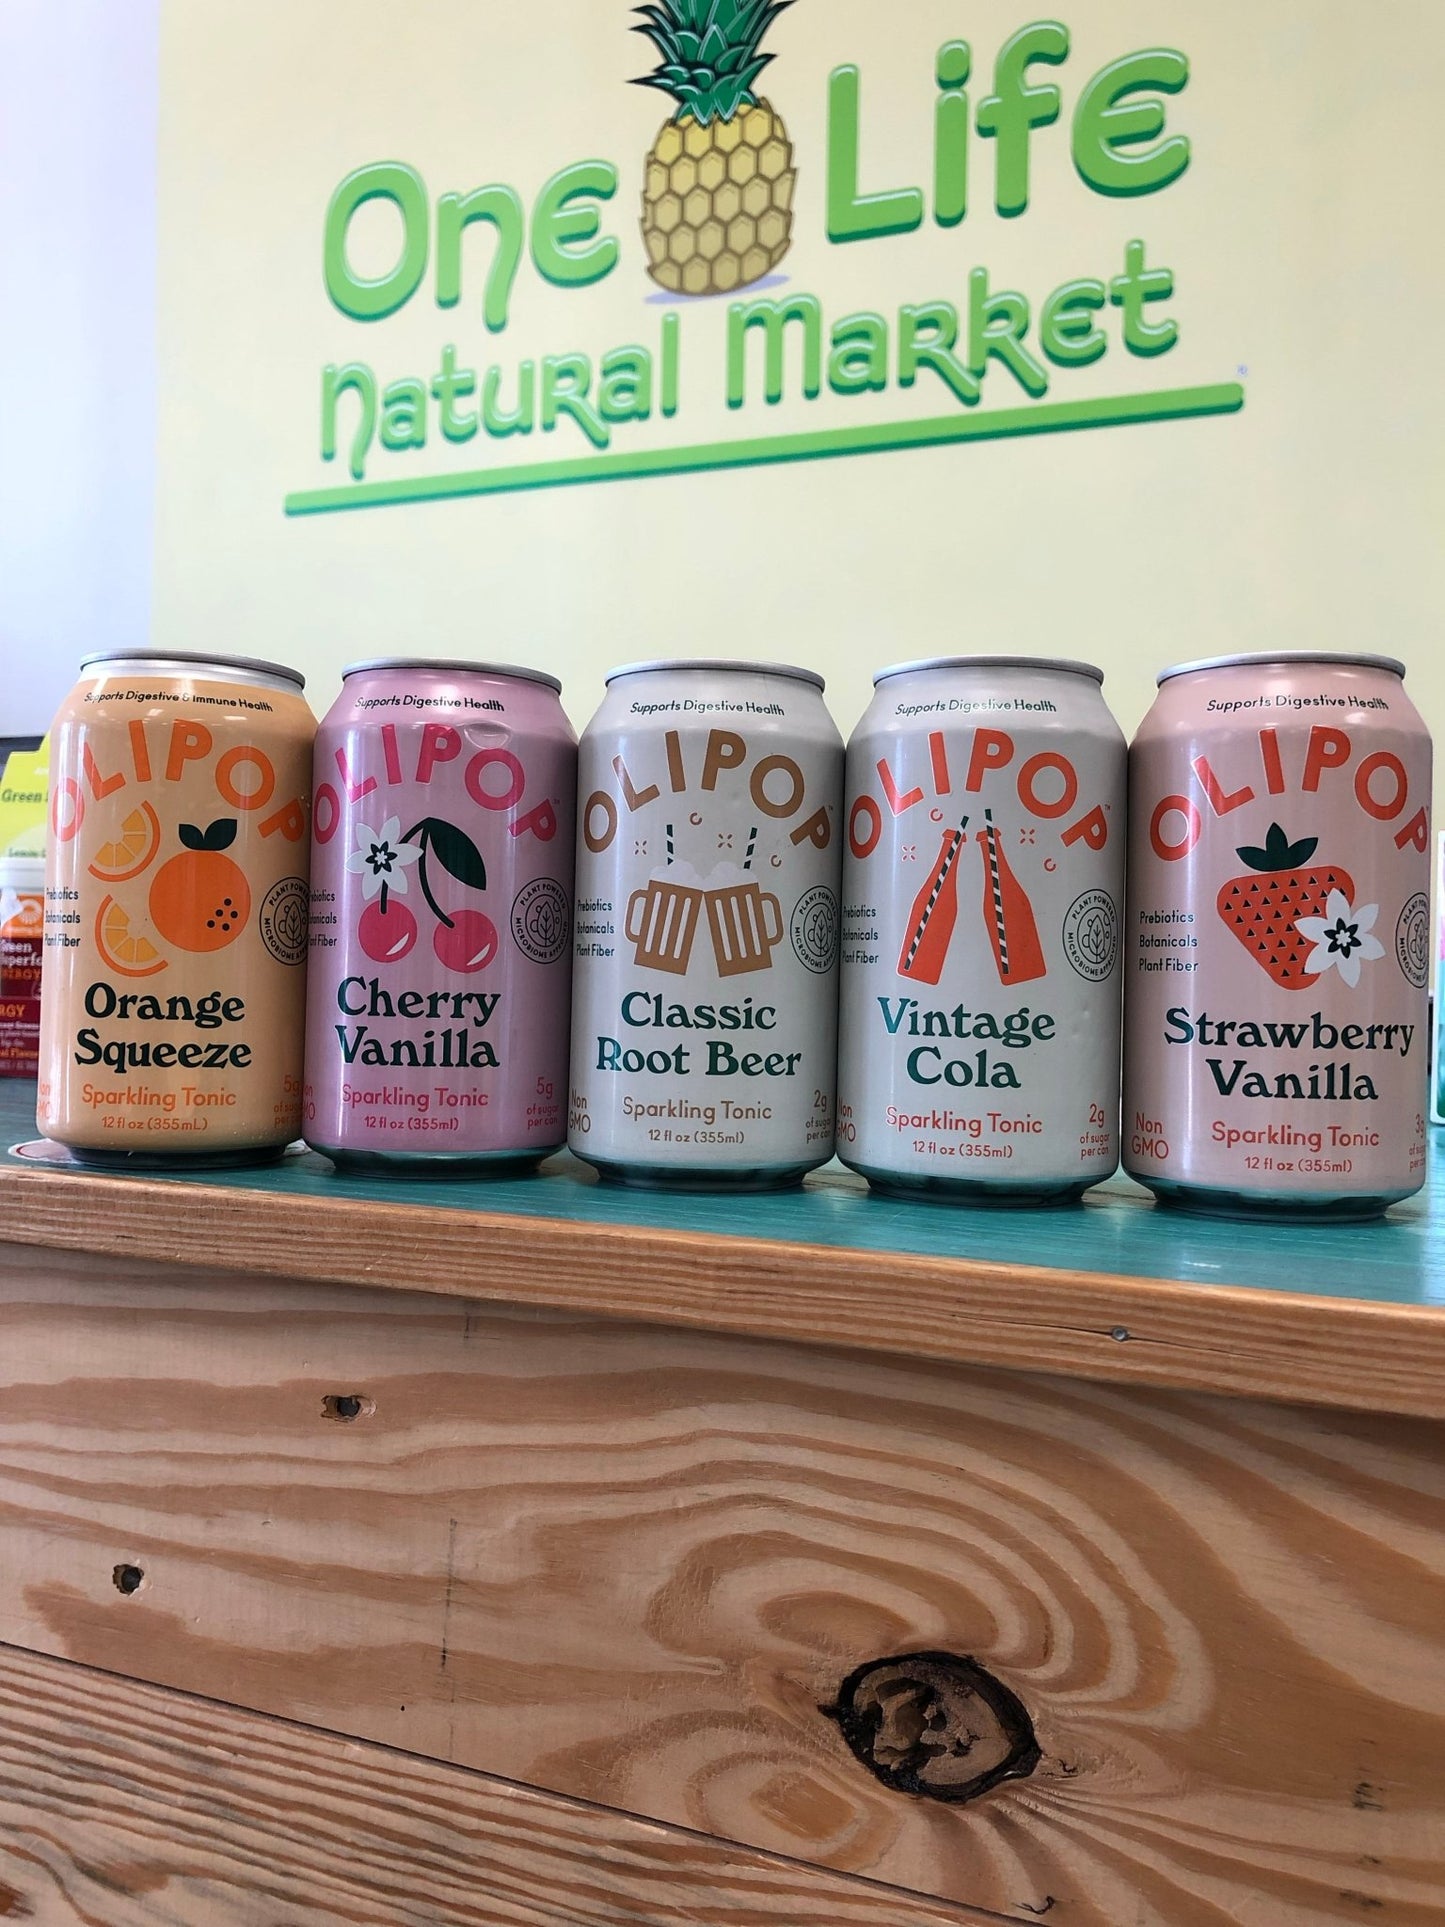 Olipop Sparkling Tonic Soda Replacement - One Life Natural Market NC